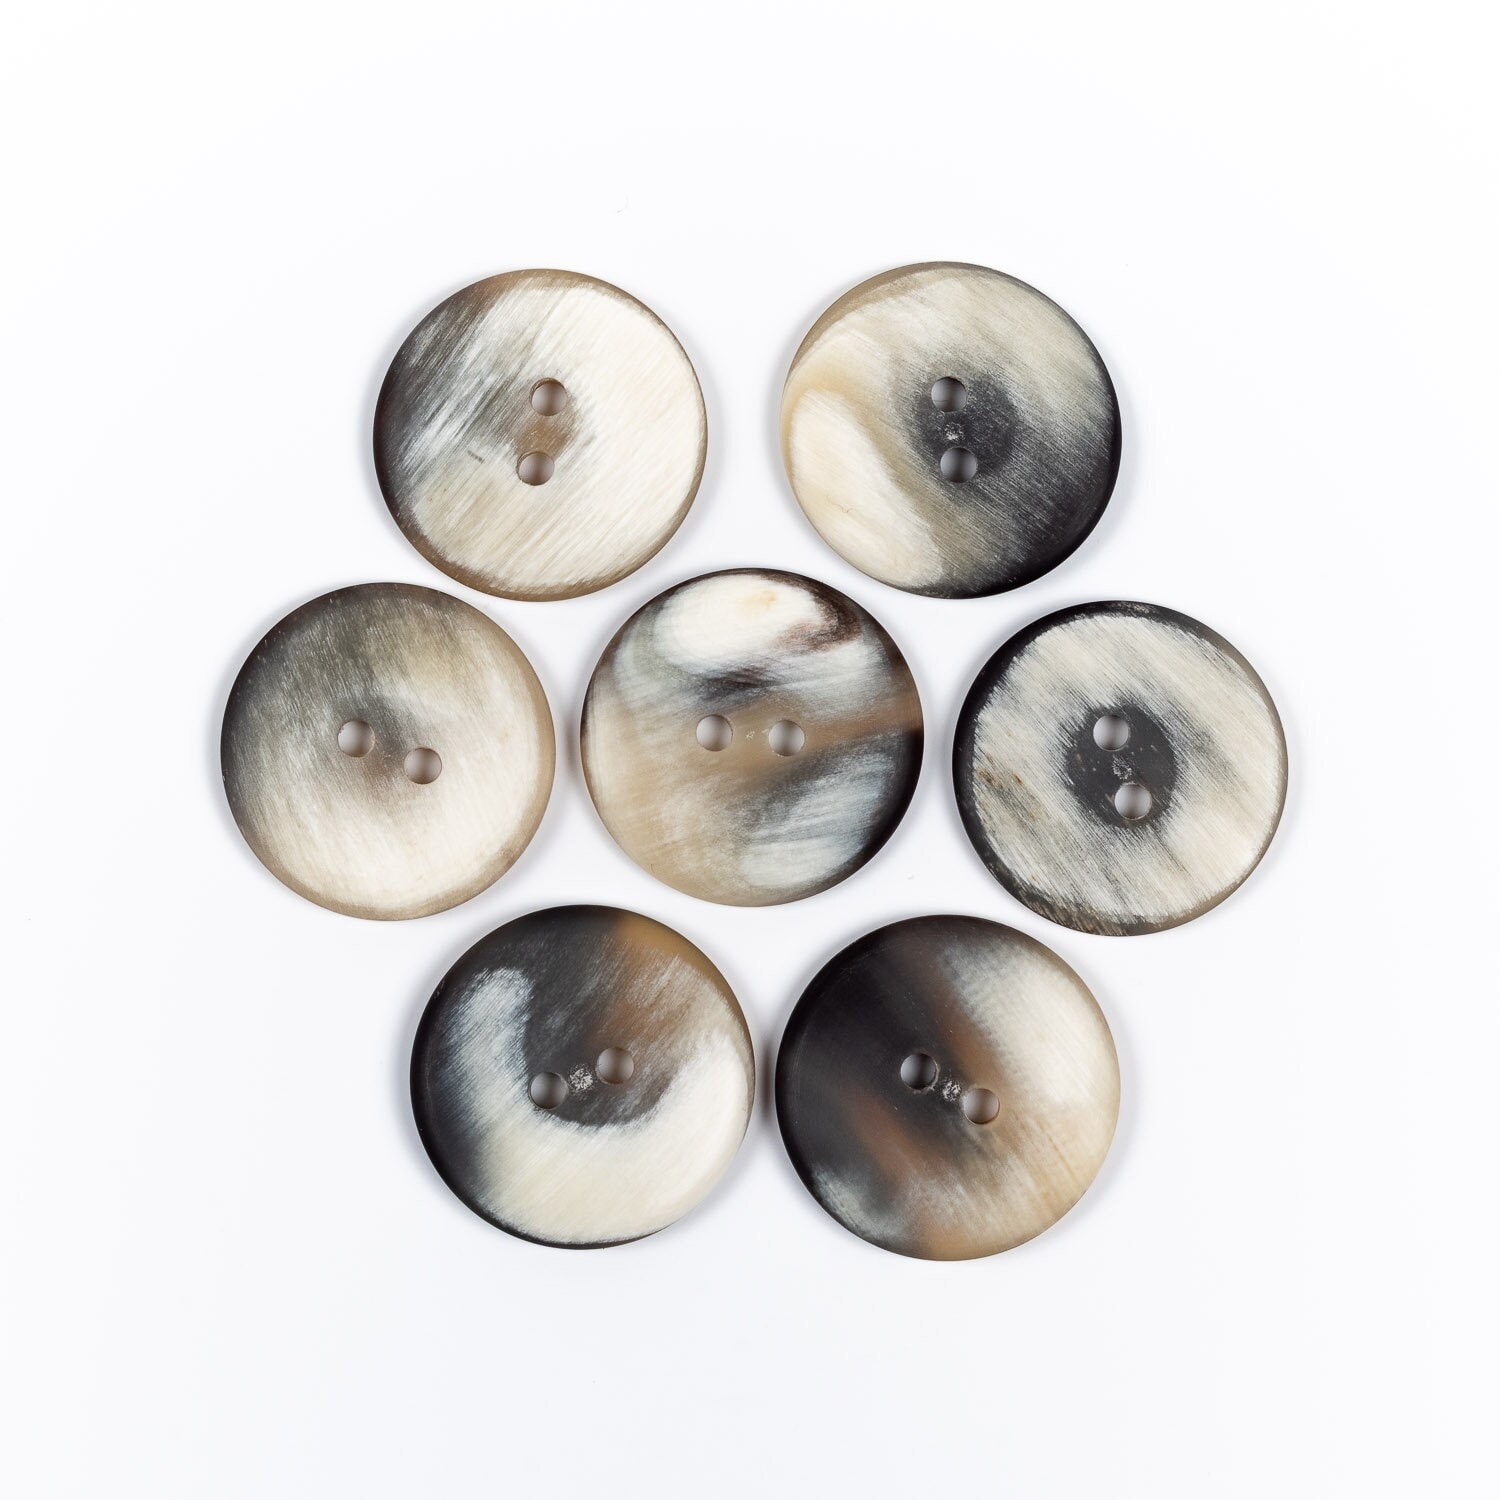 Leekayer 10pcs Dark Coffee Color Resin Toggle Buttons Horn Tooth Shape Two Holes for Duffel Coat Jacket Blazer Sewing 40mm Long Horn Buttons